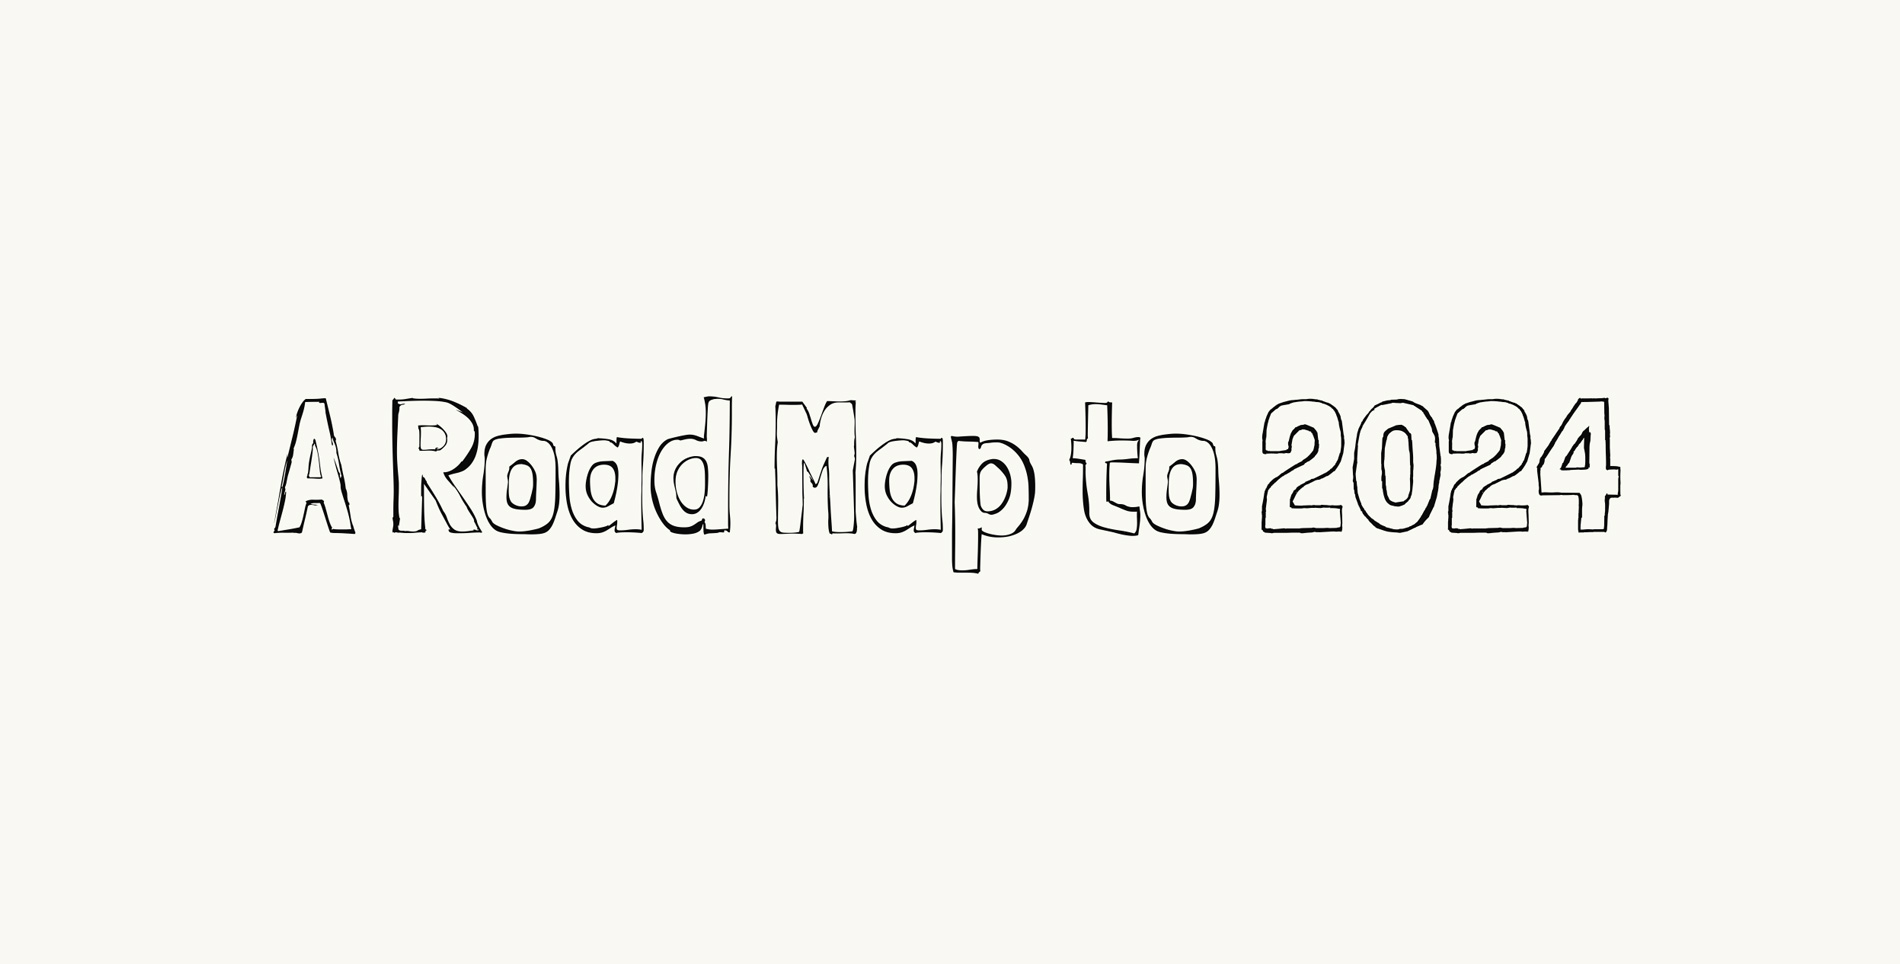 A Road Map to 2024